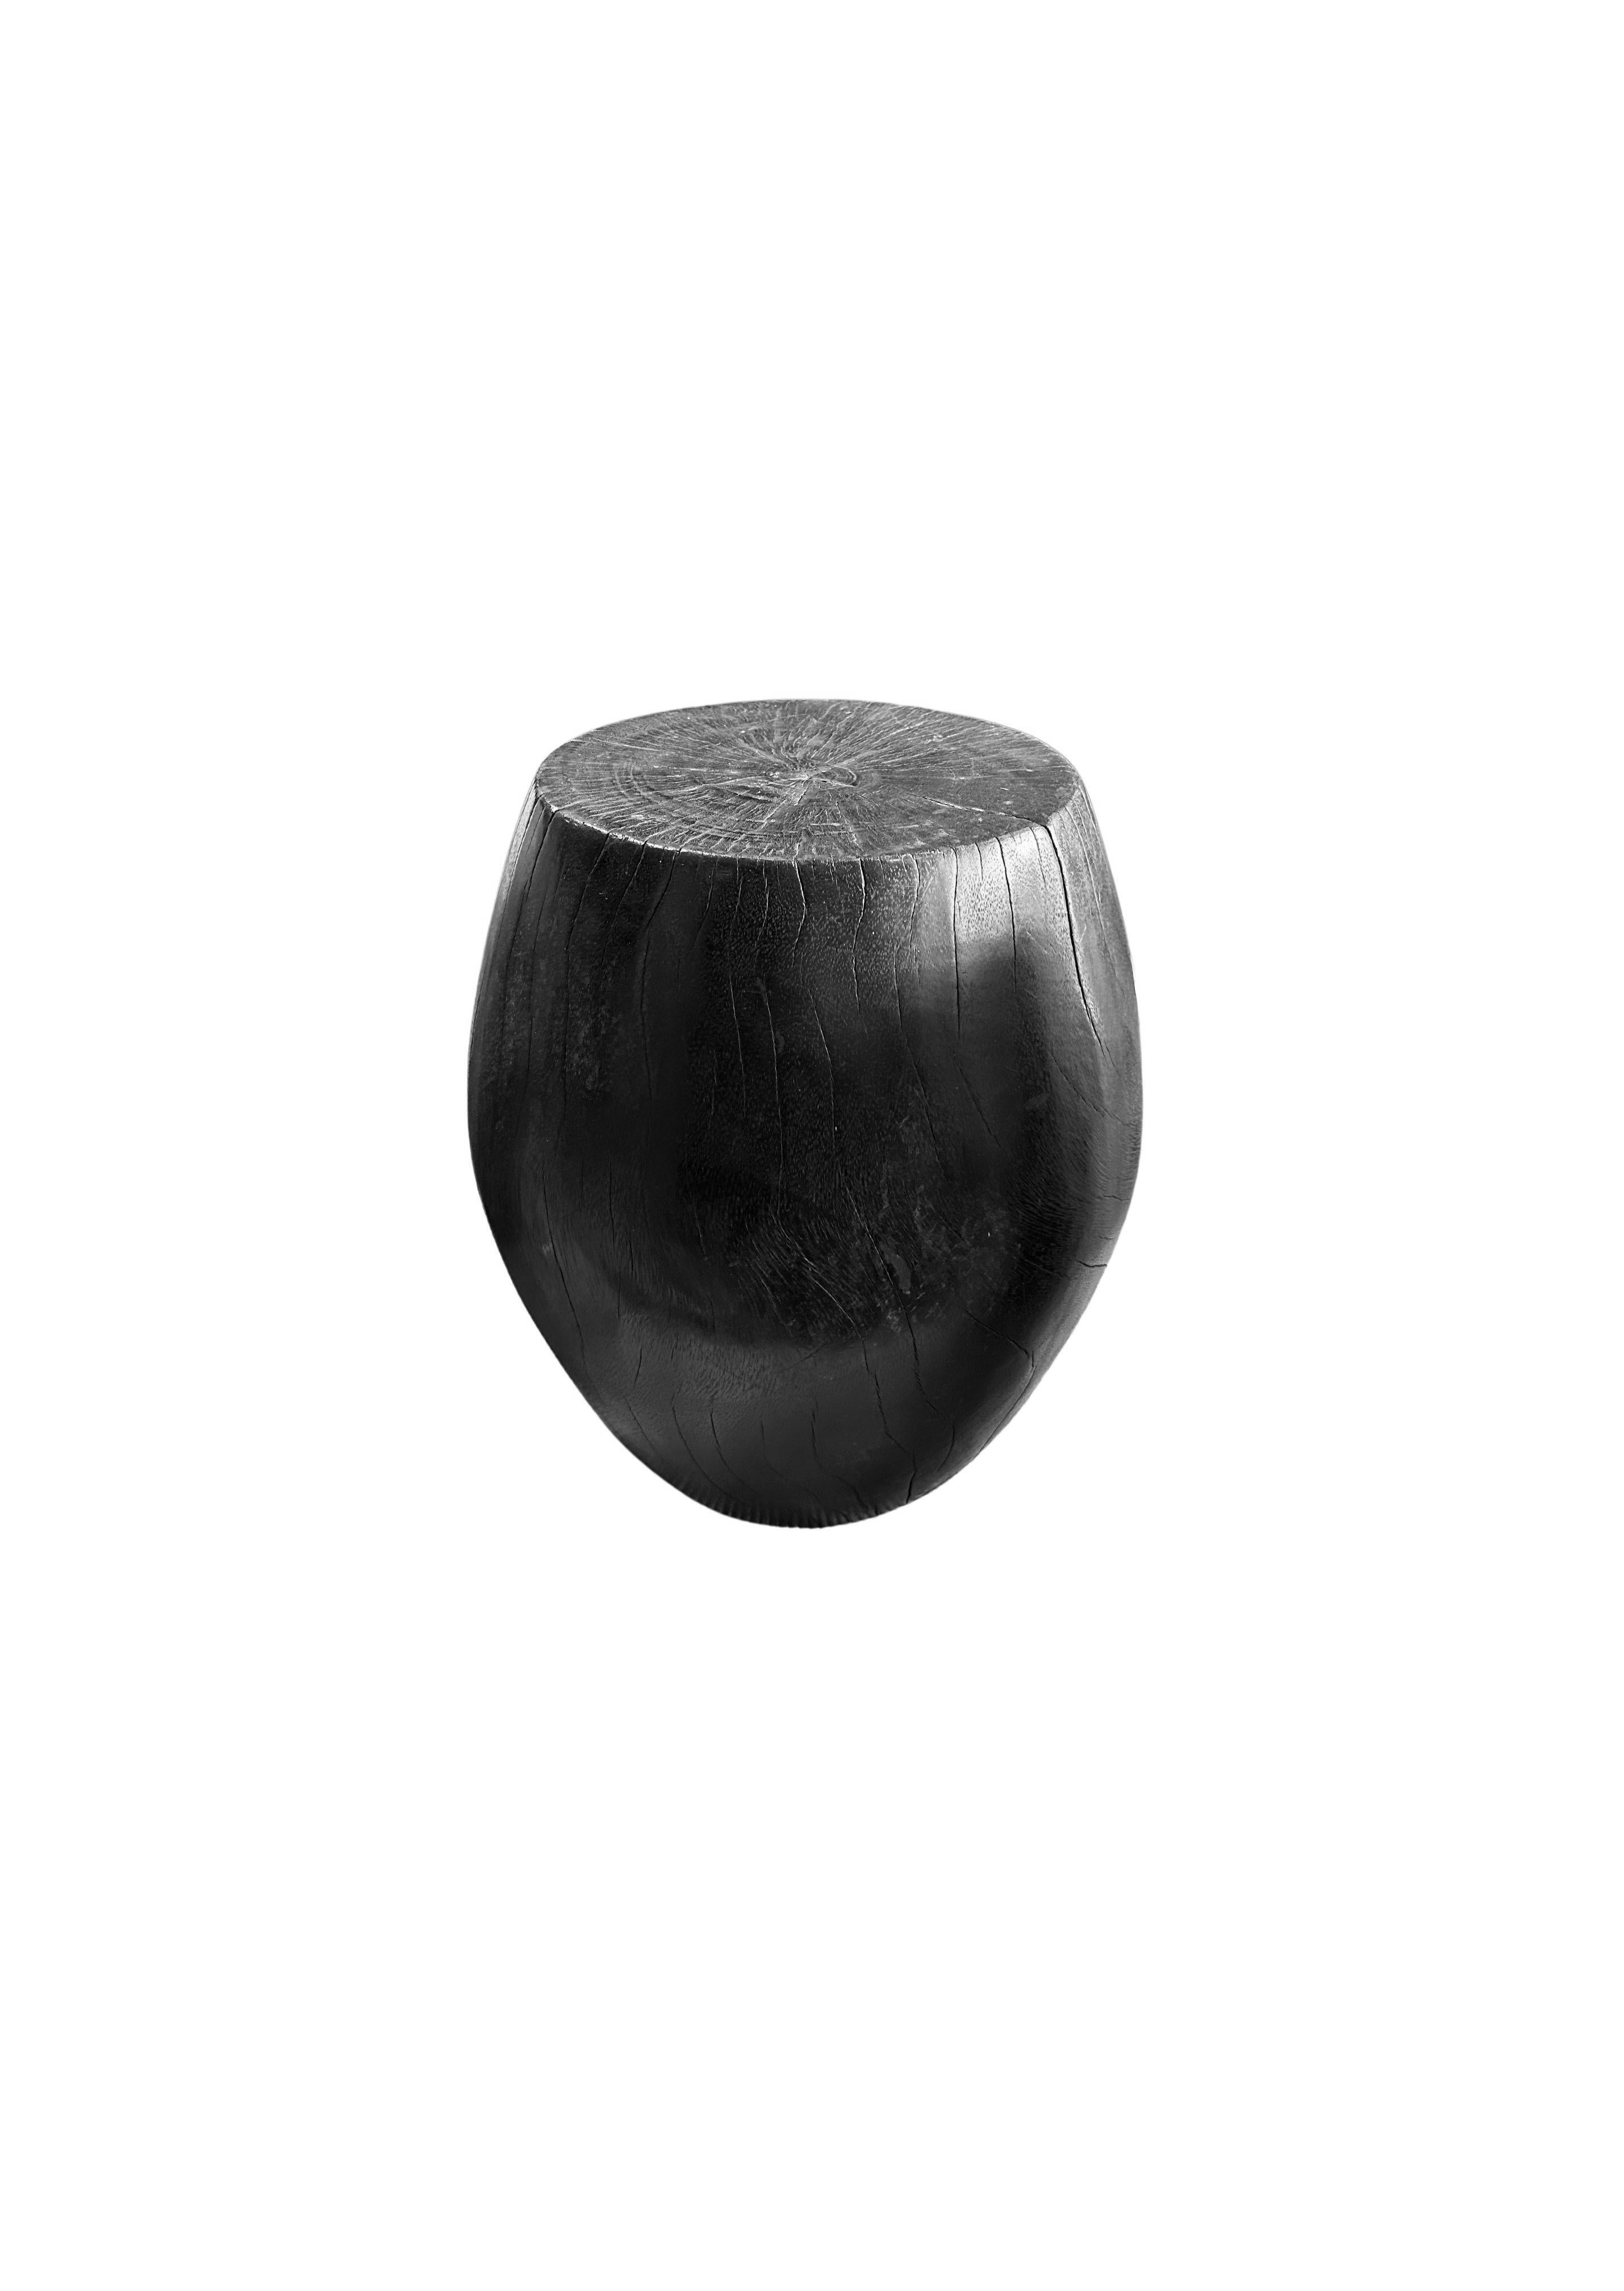 A wonderfully sculpted side table, crafted from a single block of mango wood. It features wonderful wood textures. To achieve its dark black pigment the wood was burnt numerous times and finished with a clear coat. 

Height 46cm x Diameter 30cm at